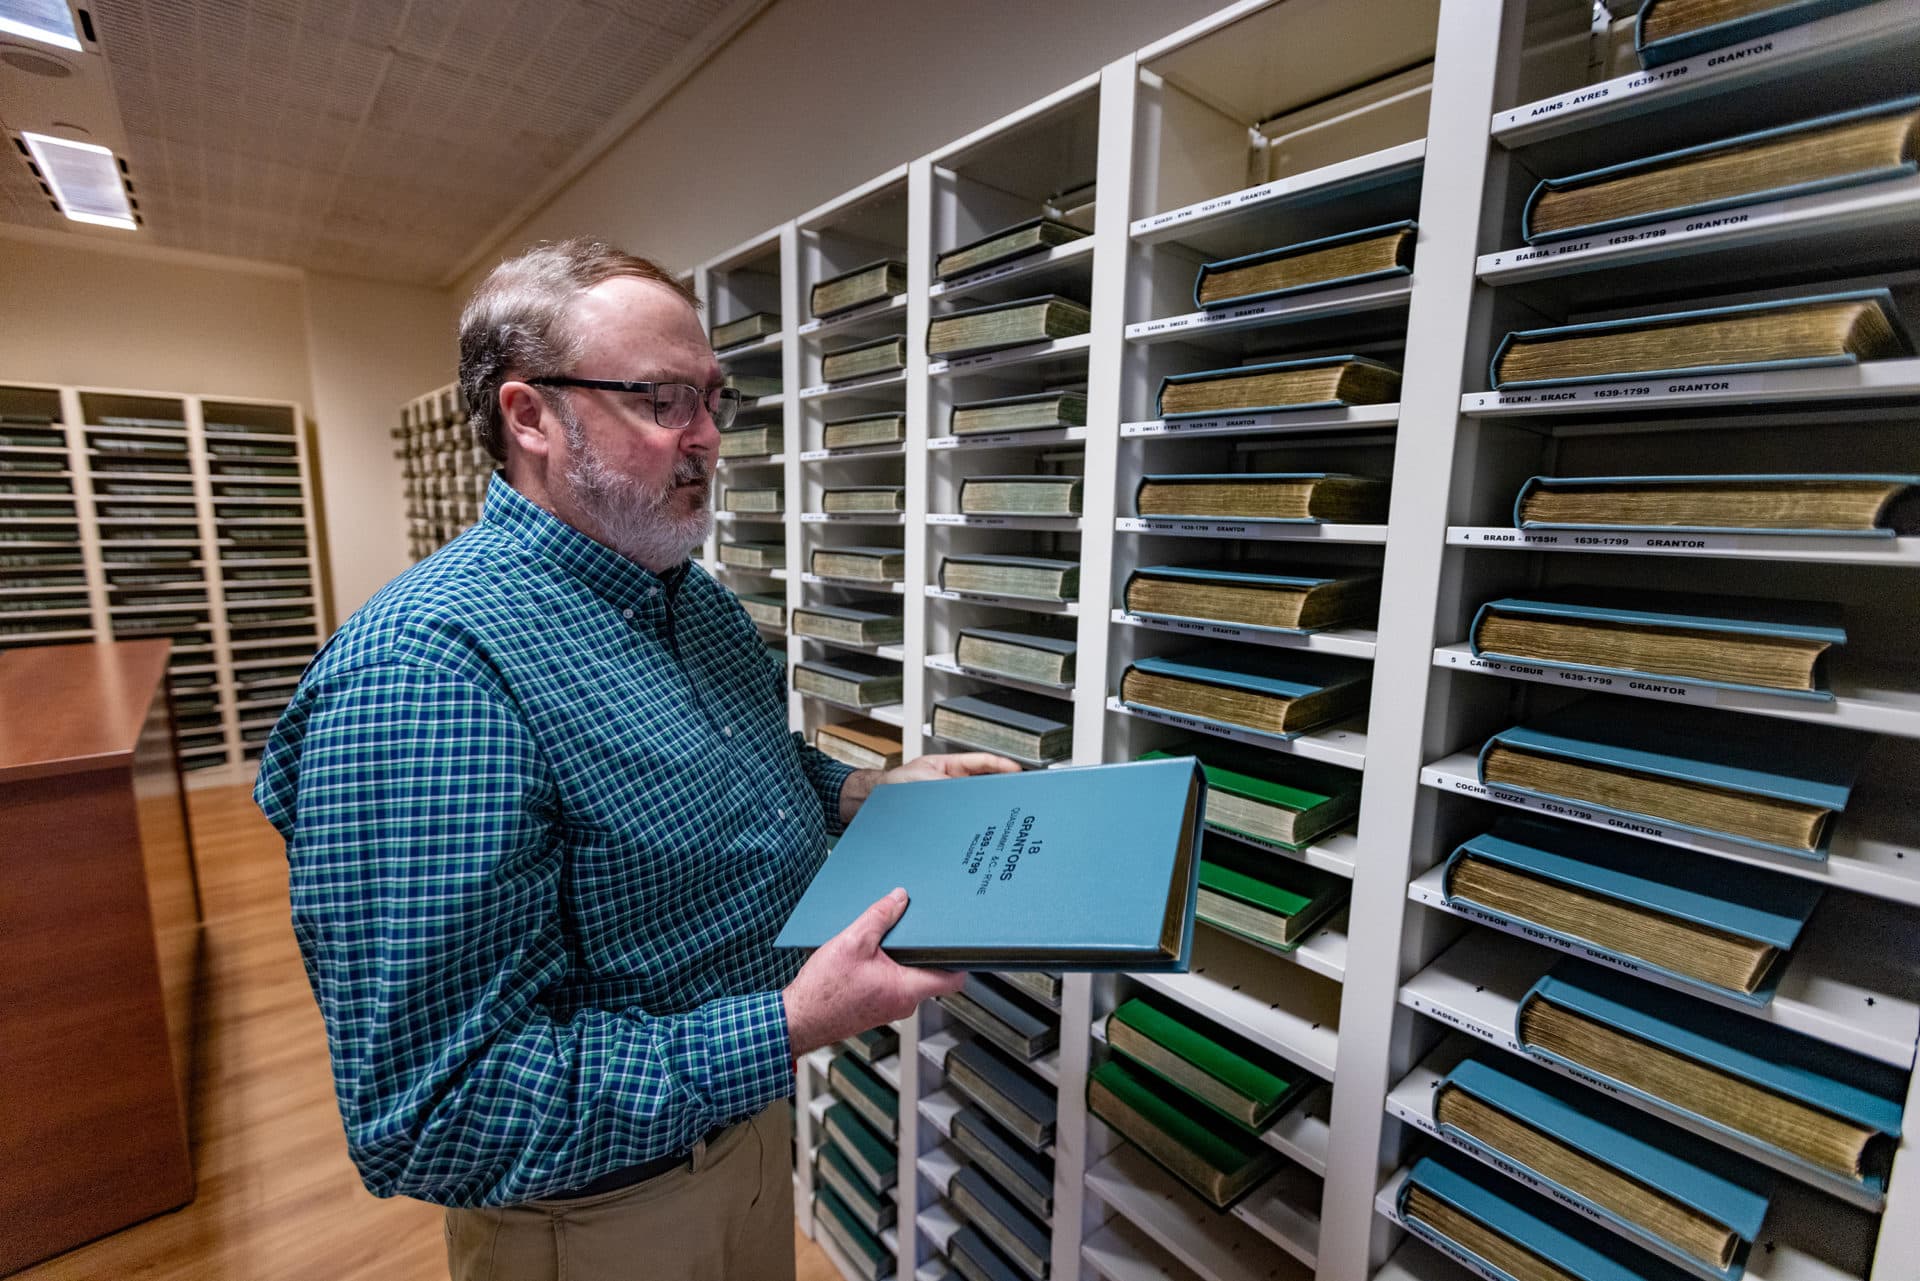 Tom Ryan, first assistant register at the Suffolk Registry of Deeds, pulls out records containing property listings for famed revolutionary Paul Revere. (Jesse Costa/WBUR)